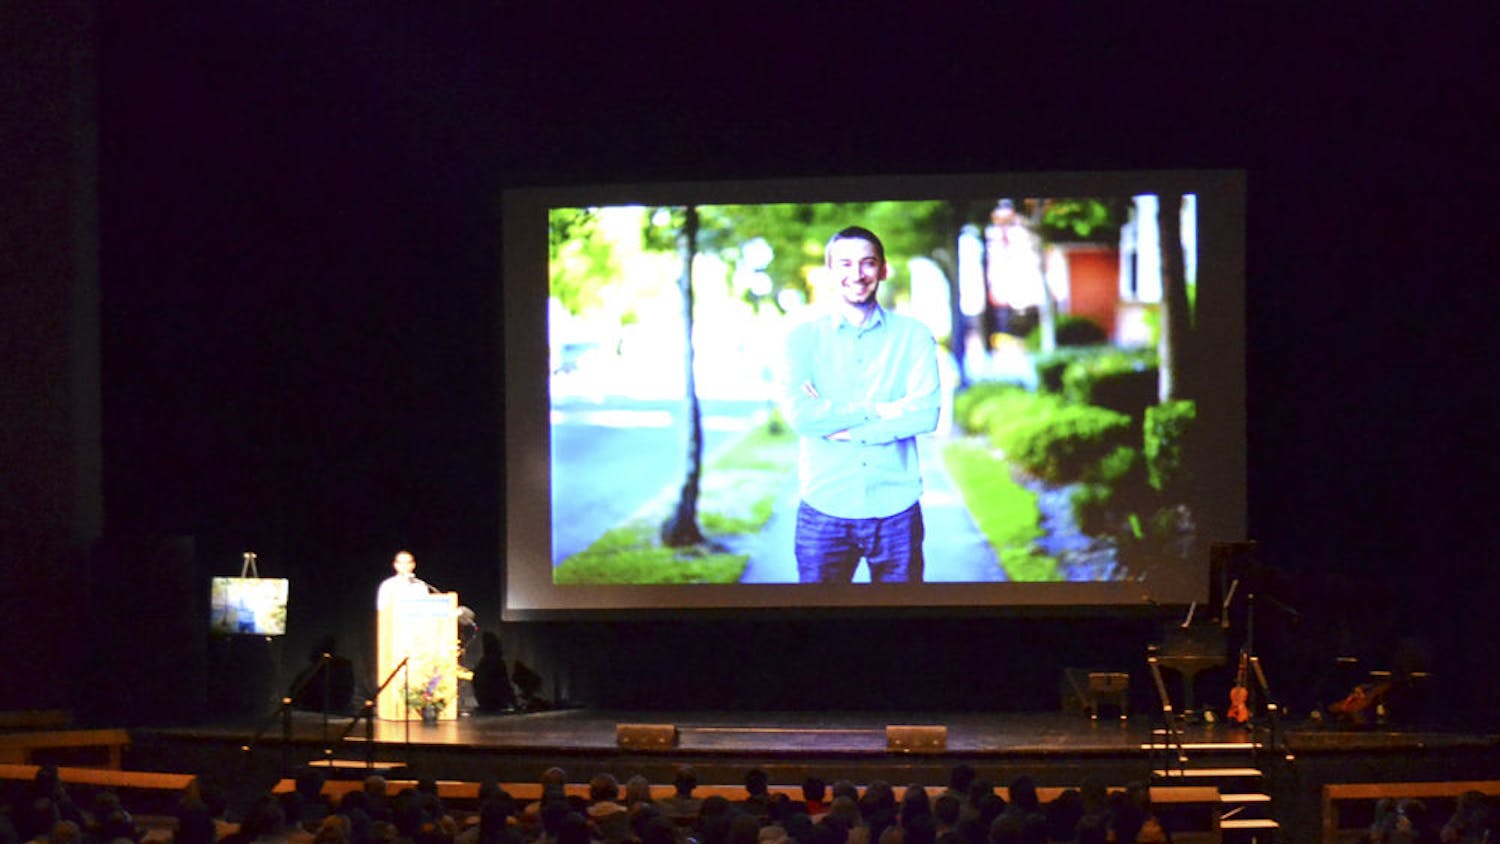 Sam Tarantino (left), co-founder of Grooveshark, a Gainesville-based music streaming service, speaks to family and friends of fellow co-founder Josh Greenberg, who was found dead on July 19.